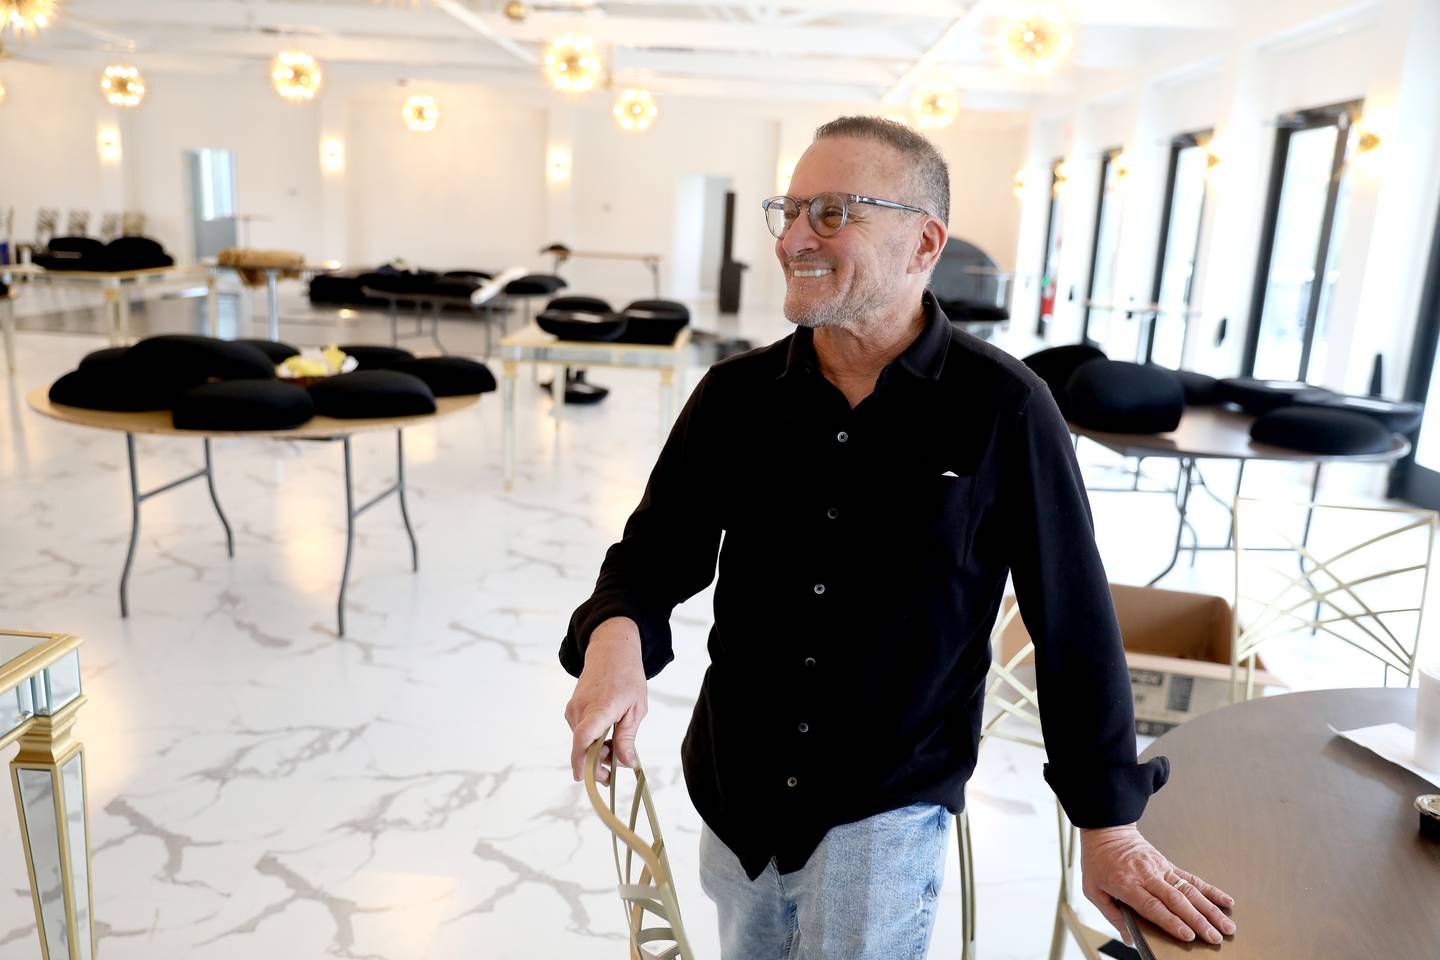 Owner Shuki Moran will host a grand opening of Revelry 675, his new event venue in Batavia, on May 6.